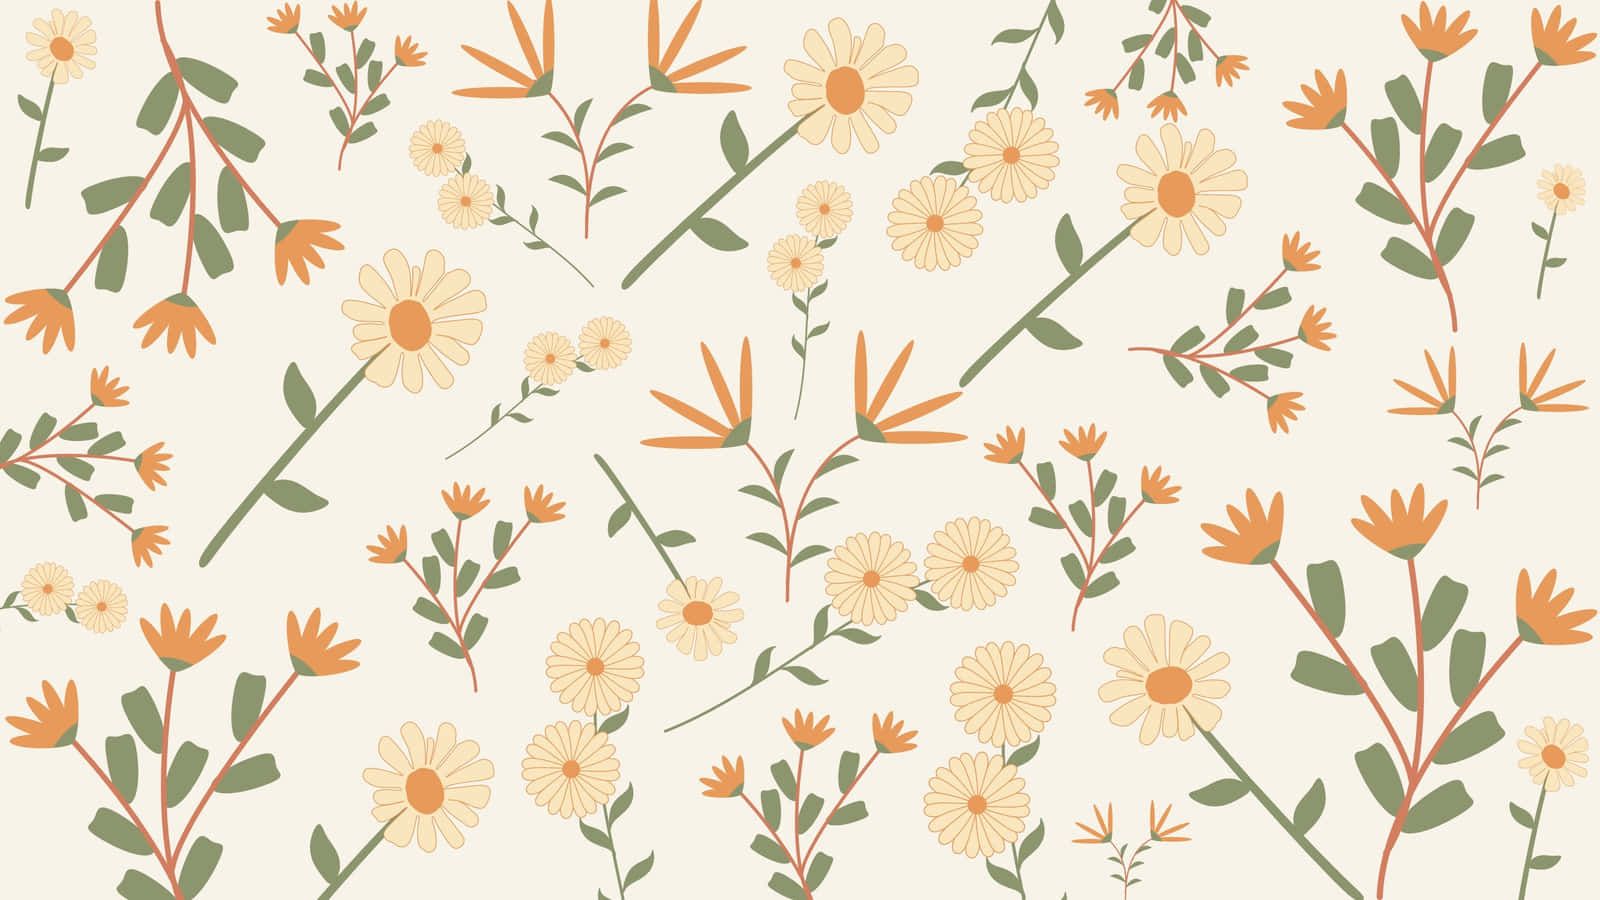 A pattern of small yellow flowers and green leaves on a cream background - Modern